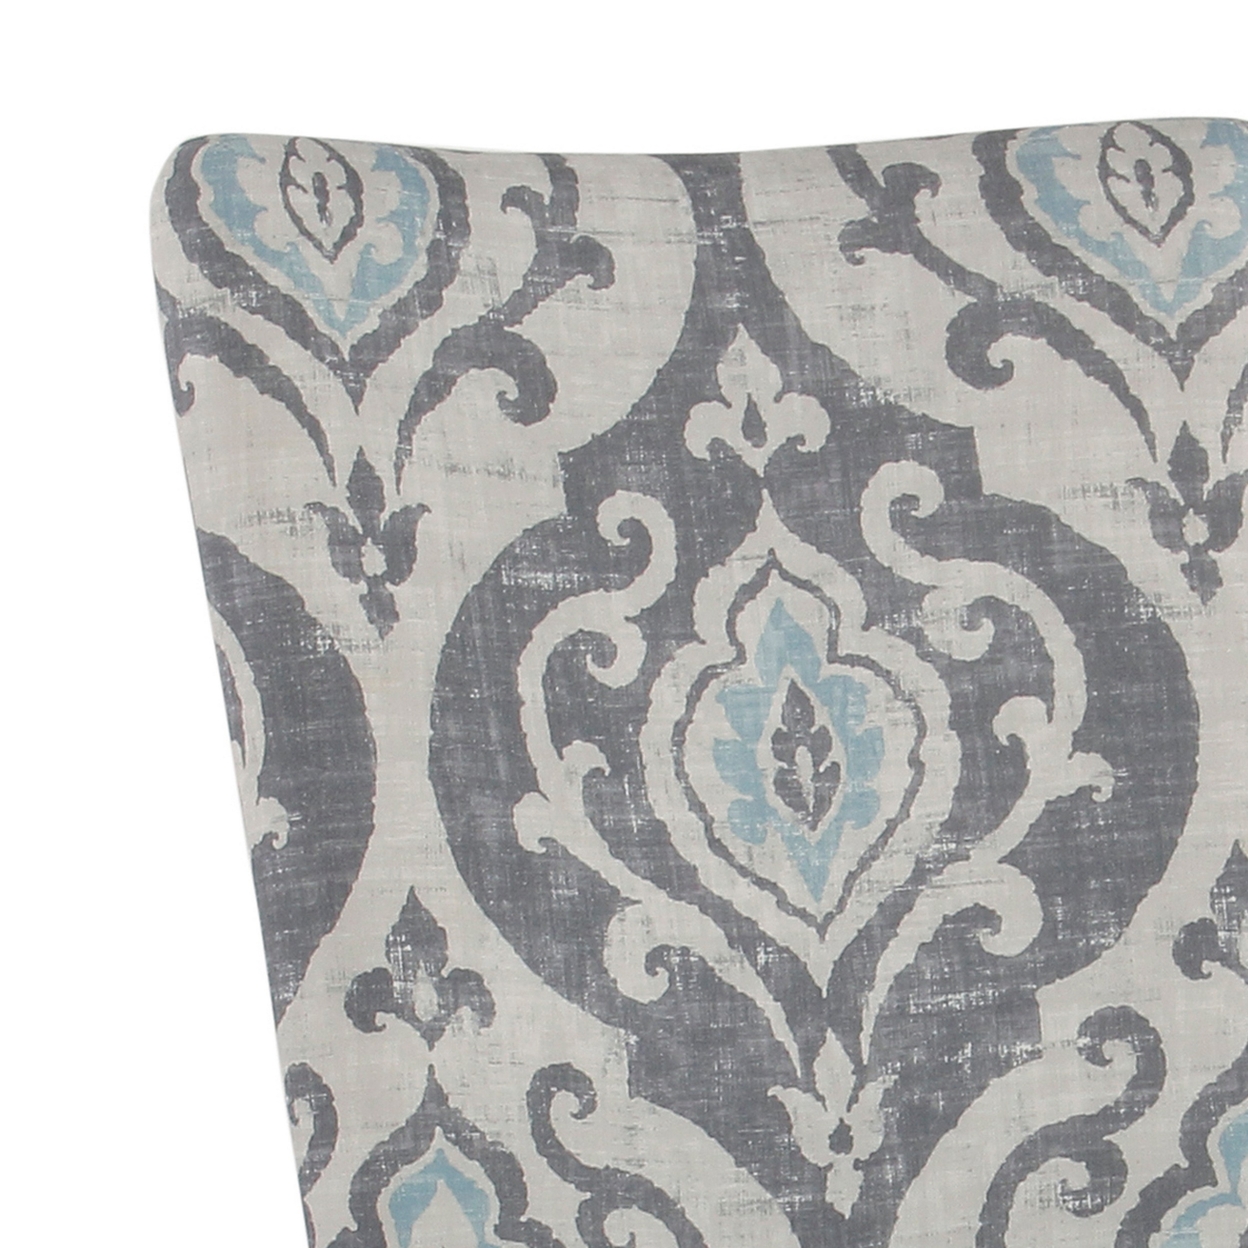 Wooden Dining Chair With Damask Print Fabric Upholstery, Gray And Blue, Set Of Two- Saltoro Sherpi